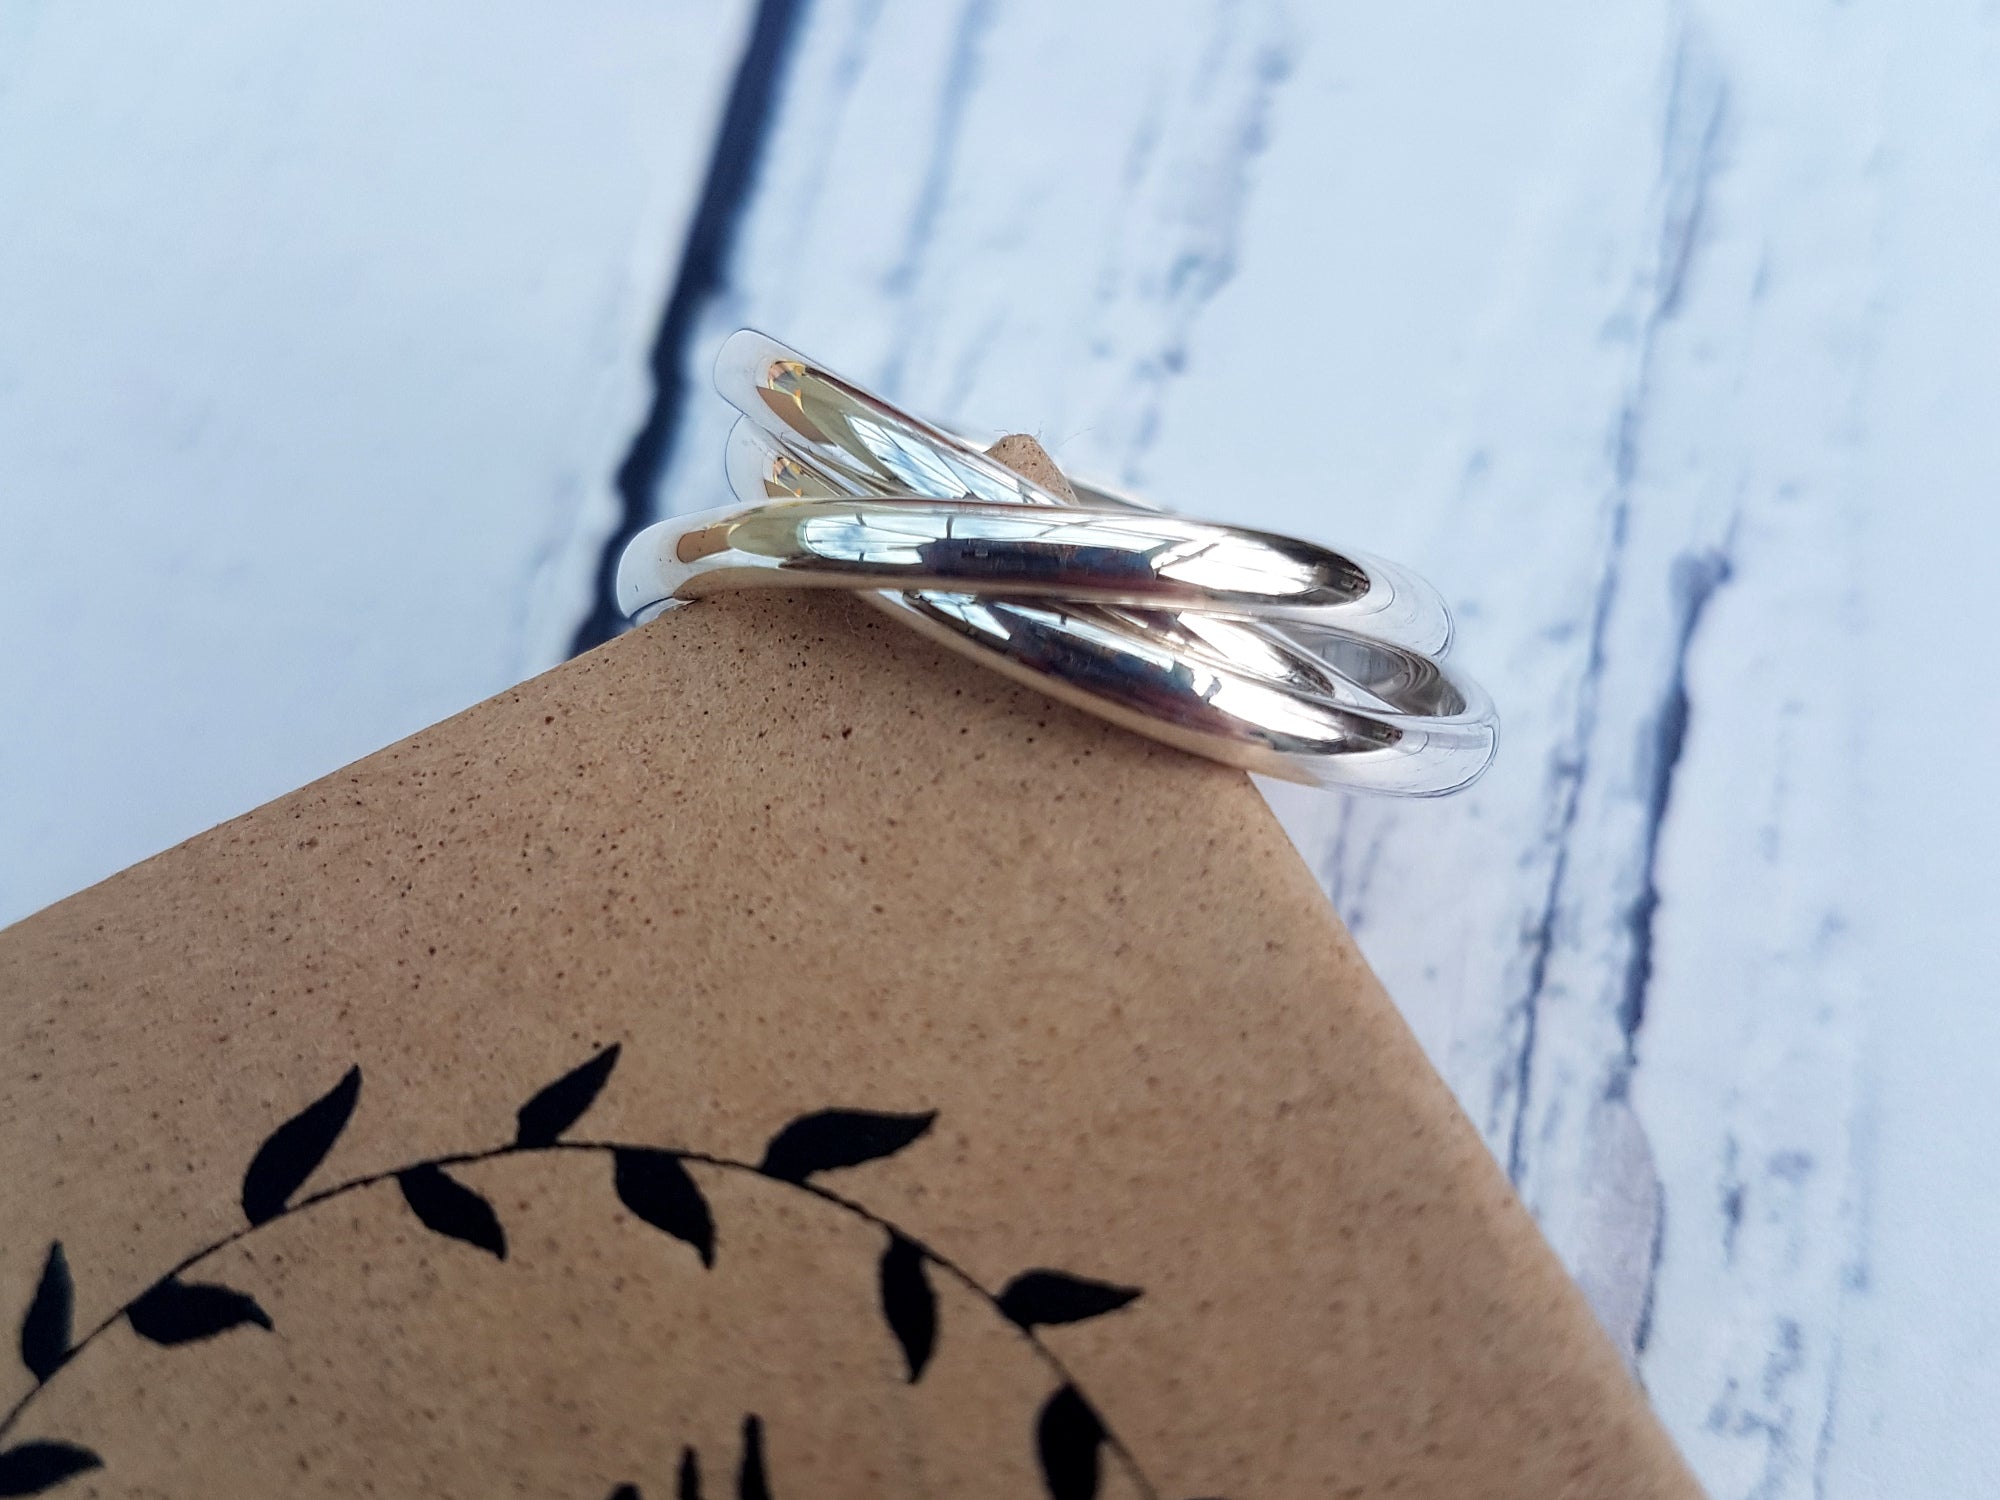 Silver Trinity Rings - 3mm Wide